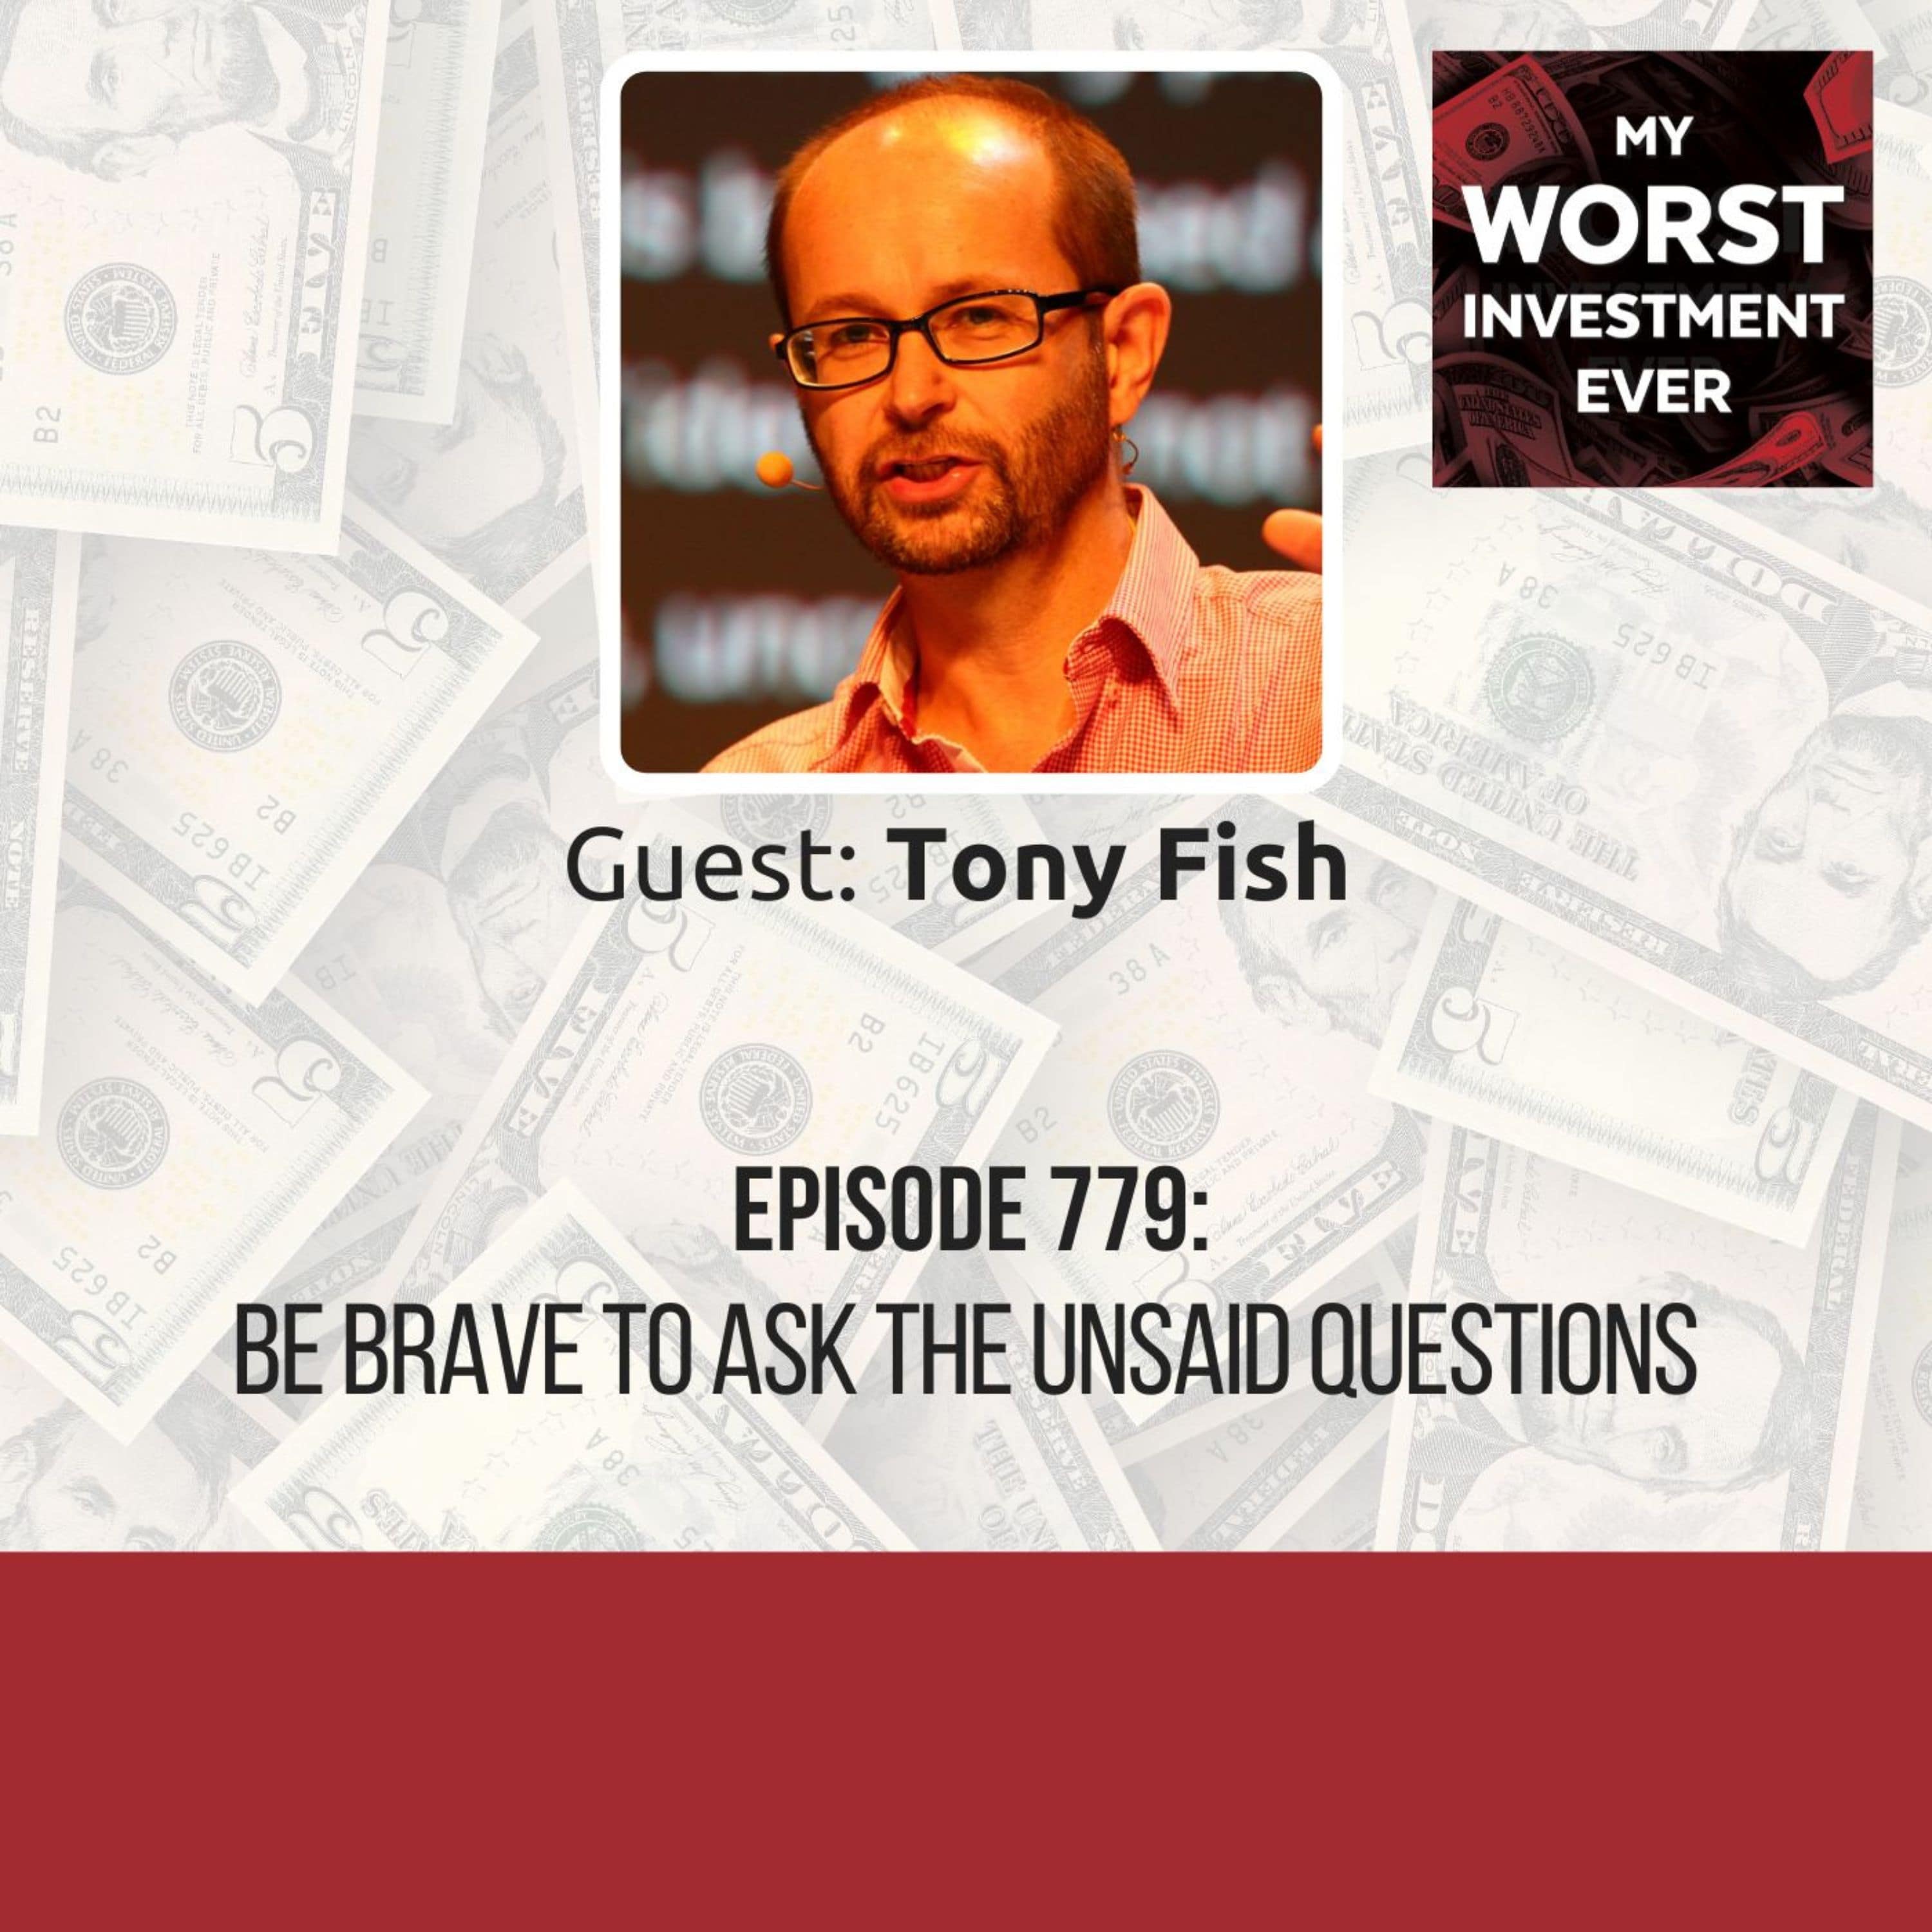 Tony Fish - Be Brave to Ask the Unsaid Questions